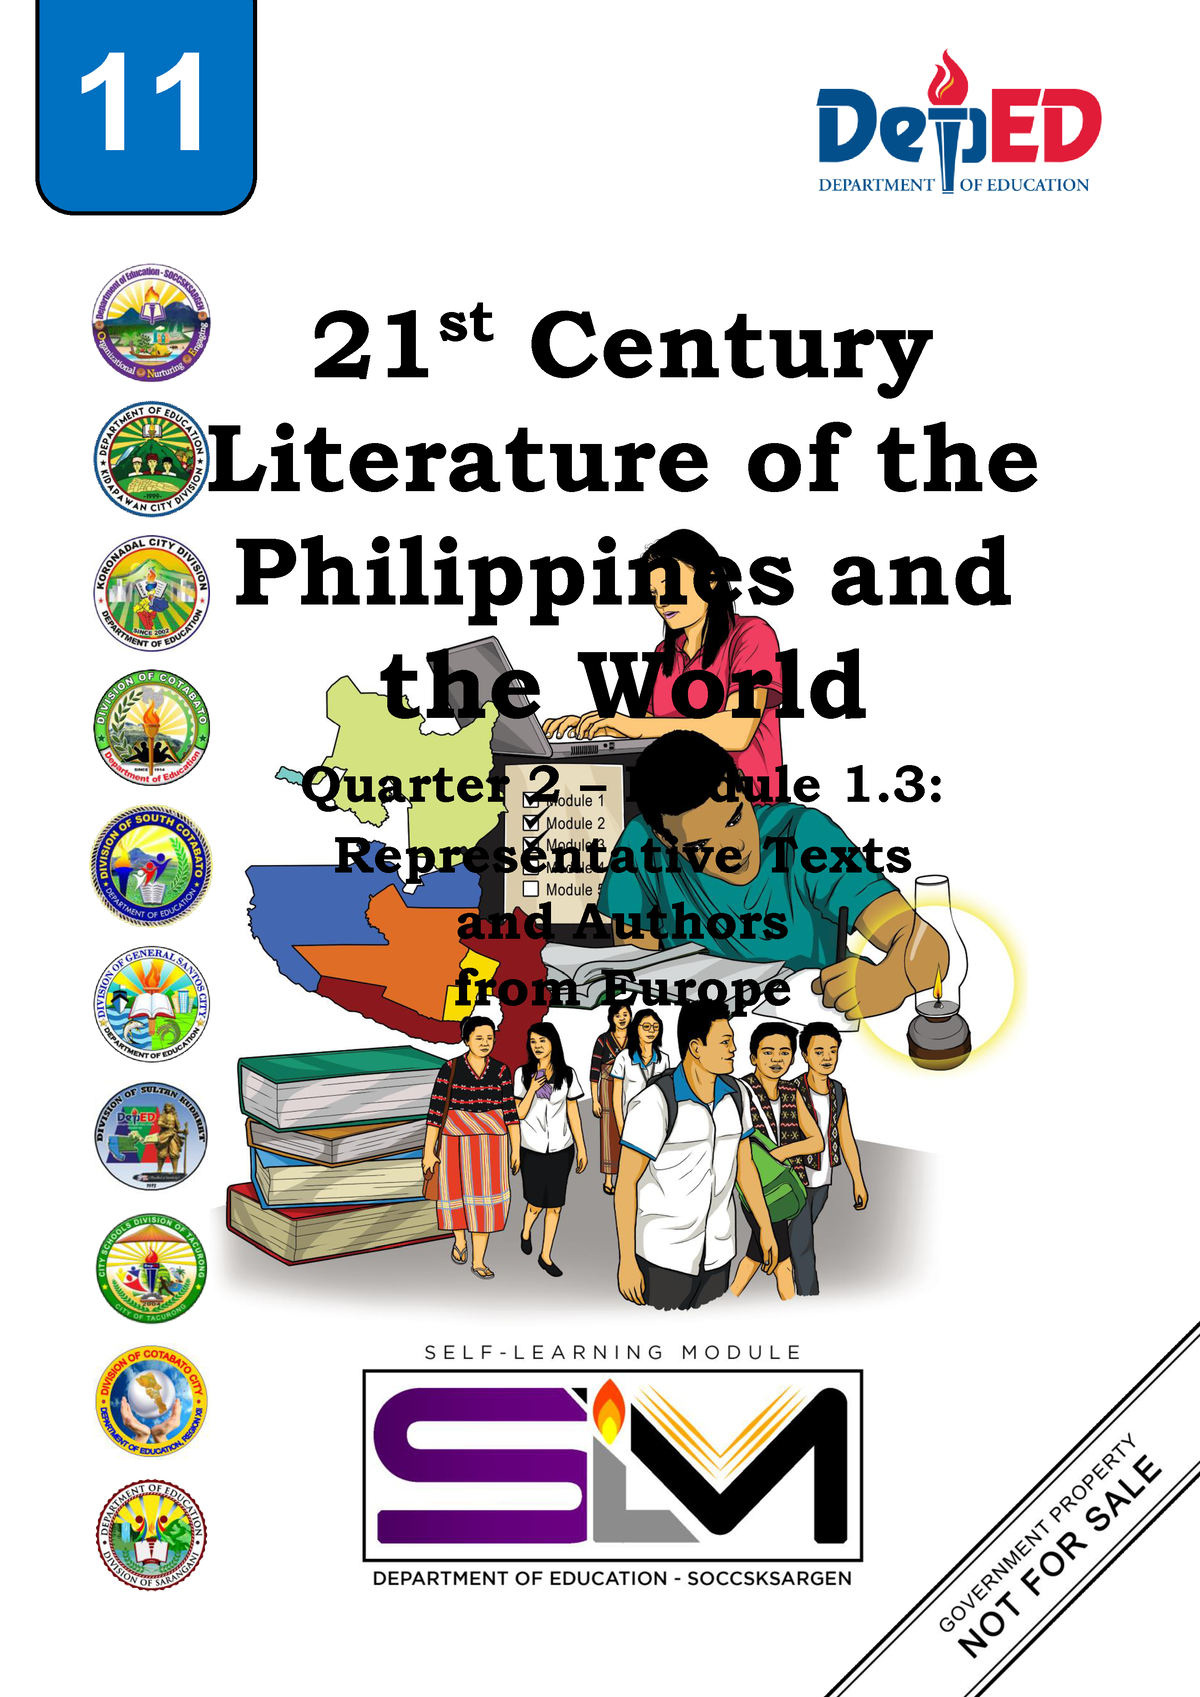 introduction about 21st century literature